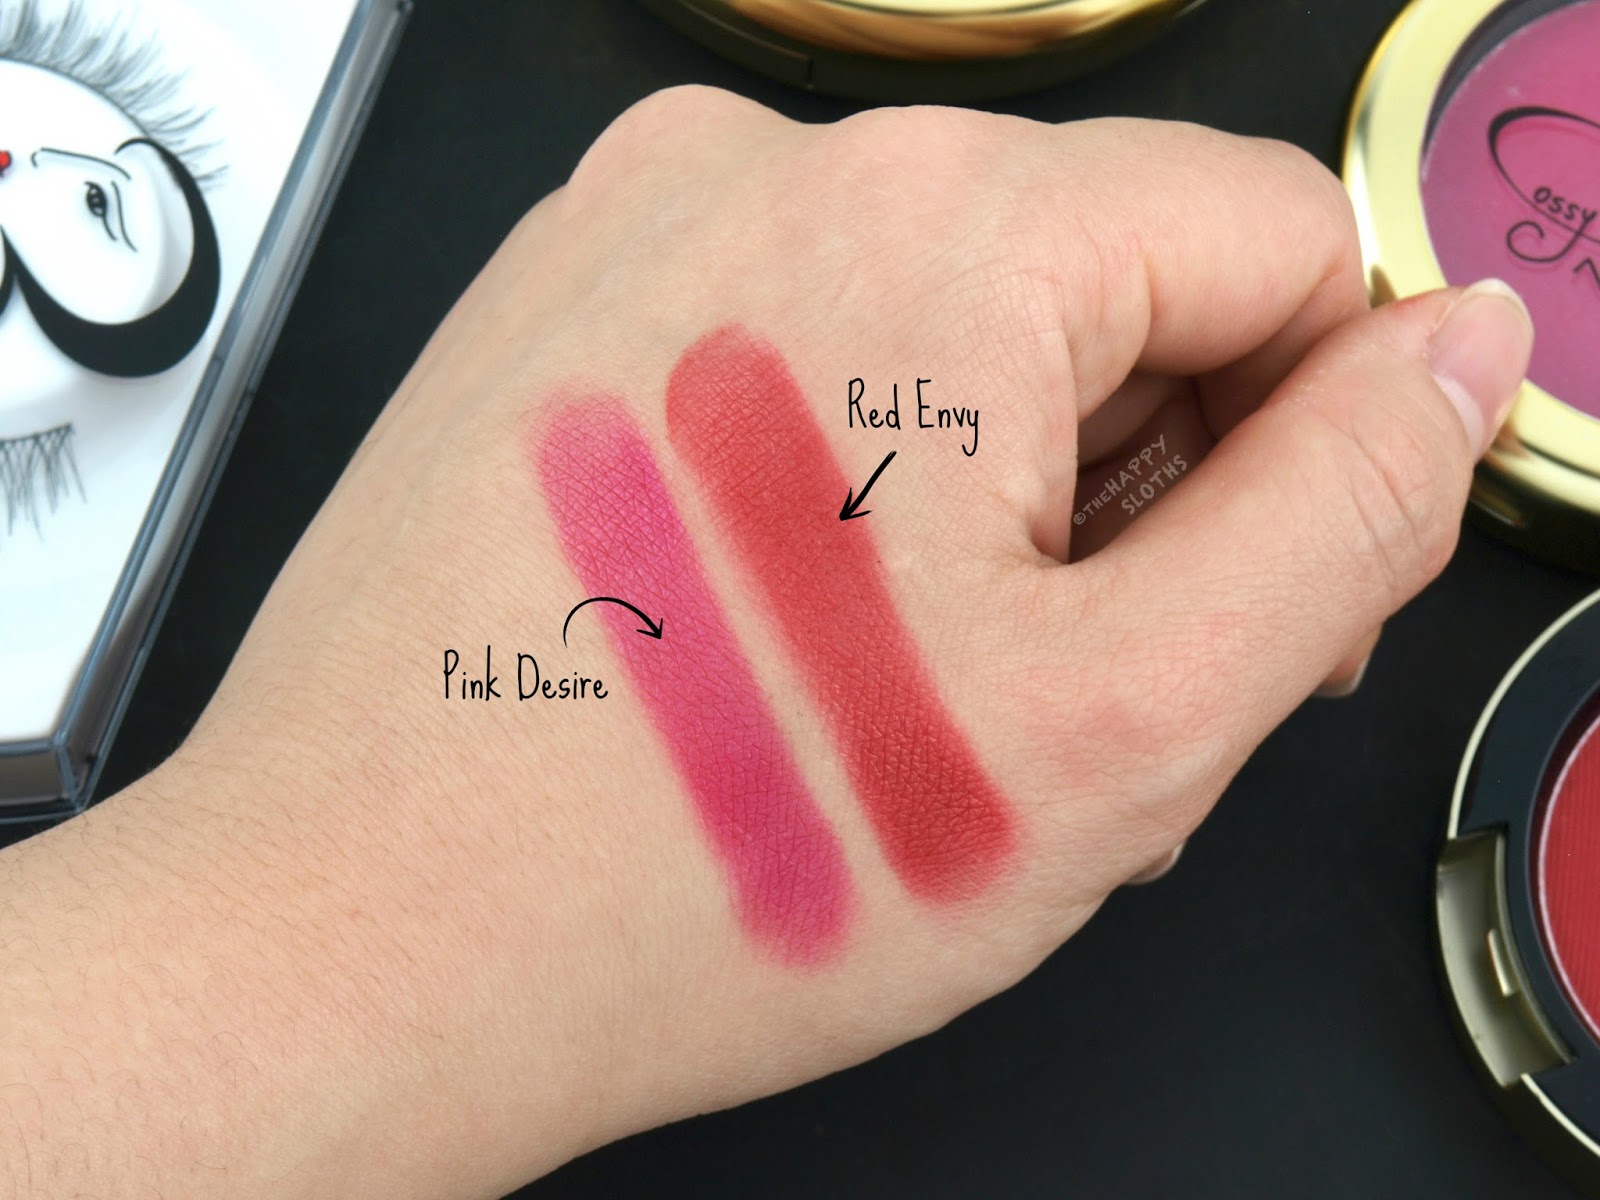 MAC x Rossy de Palma Collection: Review and Swatches